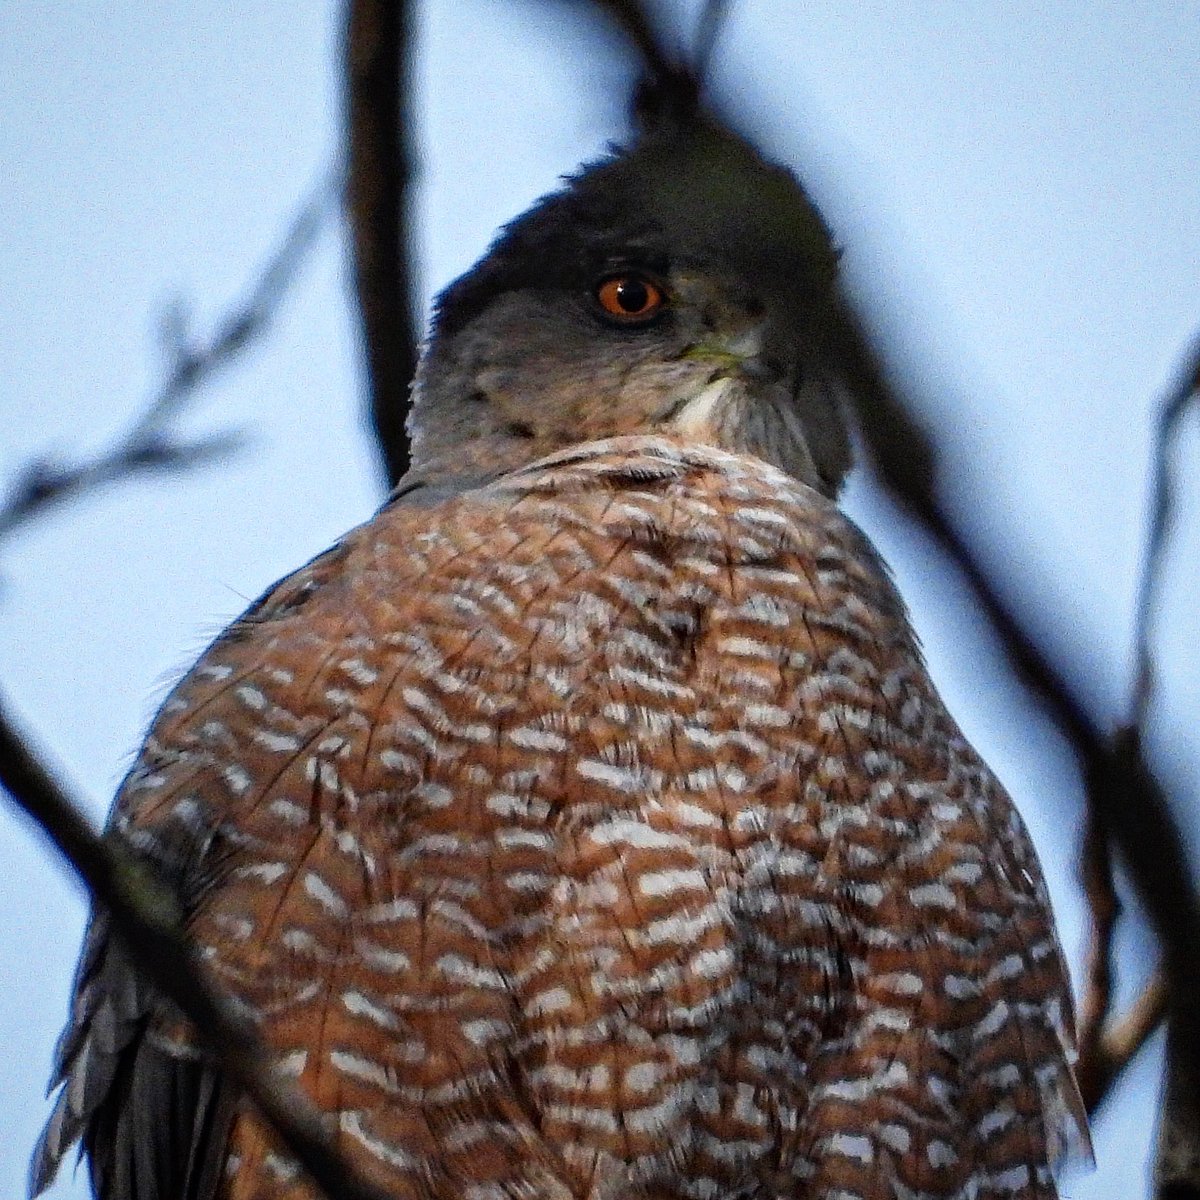 The ✨light✨in this Cooper’s hawk eye - pure magic ✨❤️✨ I love these beautiful raptors. ❤️ he’s watching over his mate, she’s on the nest nearby - delta bc 🇨🇦 Sat 6 April 2024 #coopershawk #raptors #birds #nature #wildlife #wildvancouver